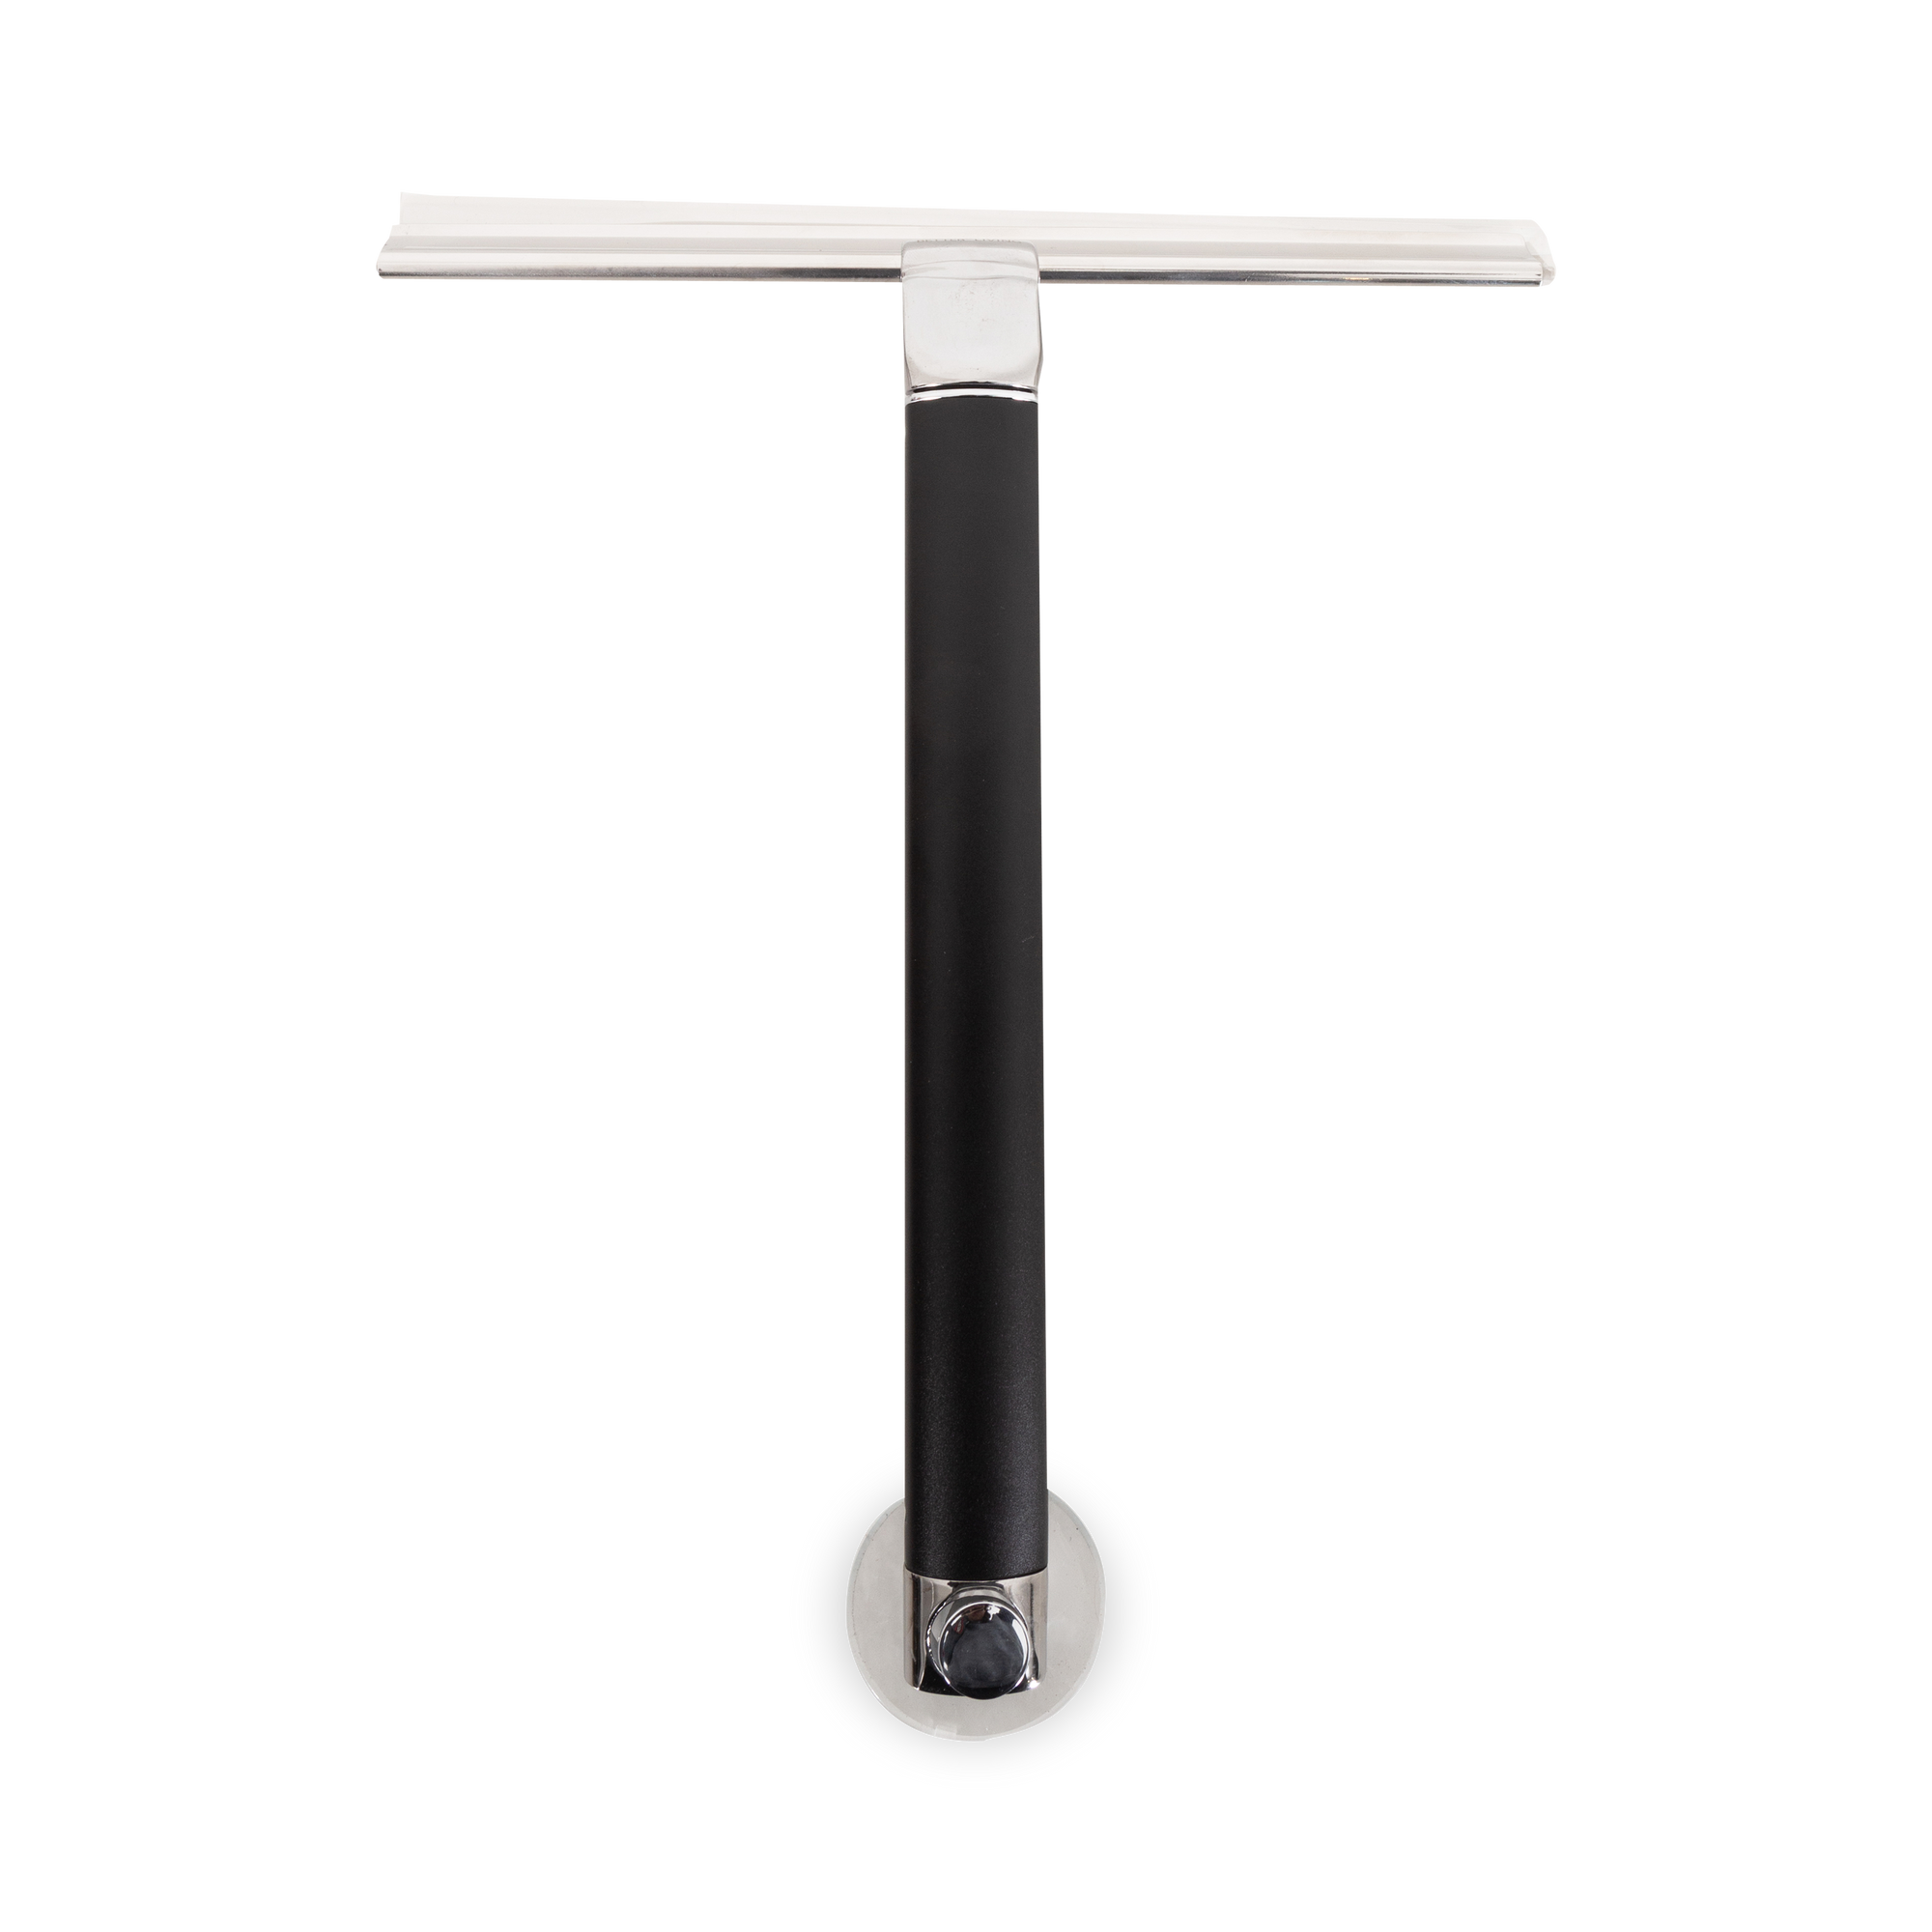 Ergonomically curved handle extends squeegee to 18